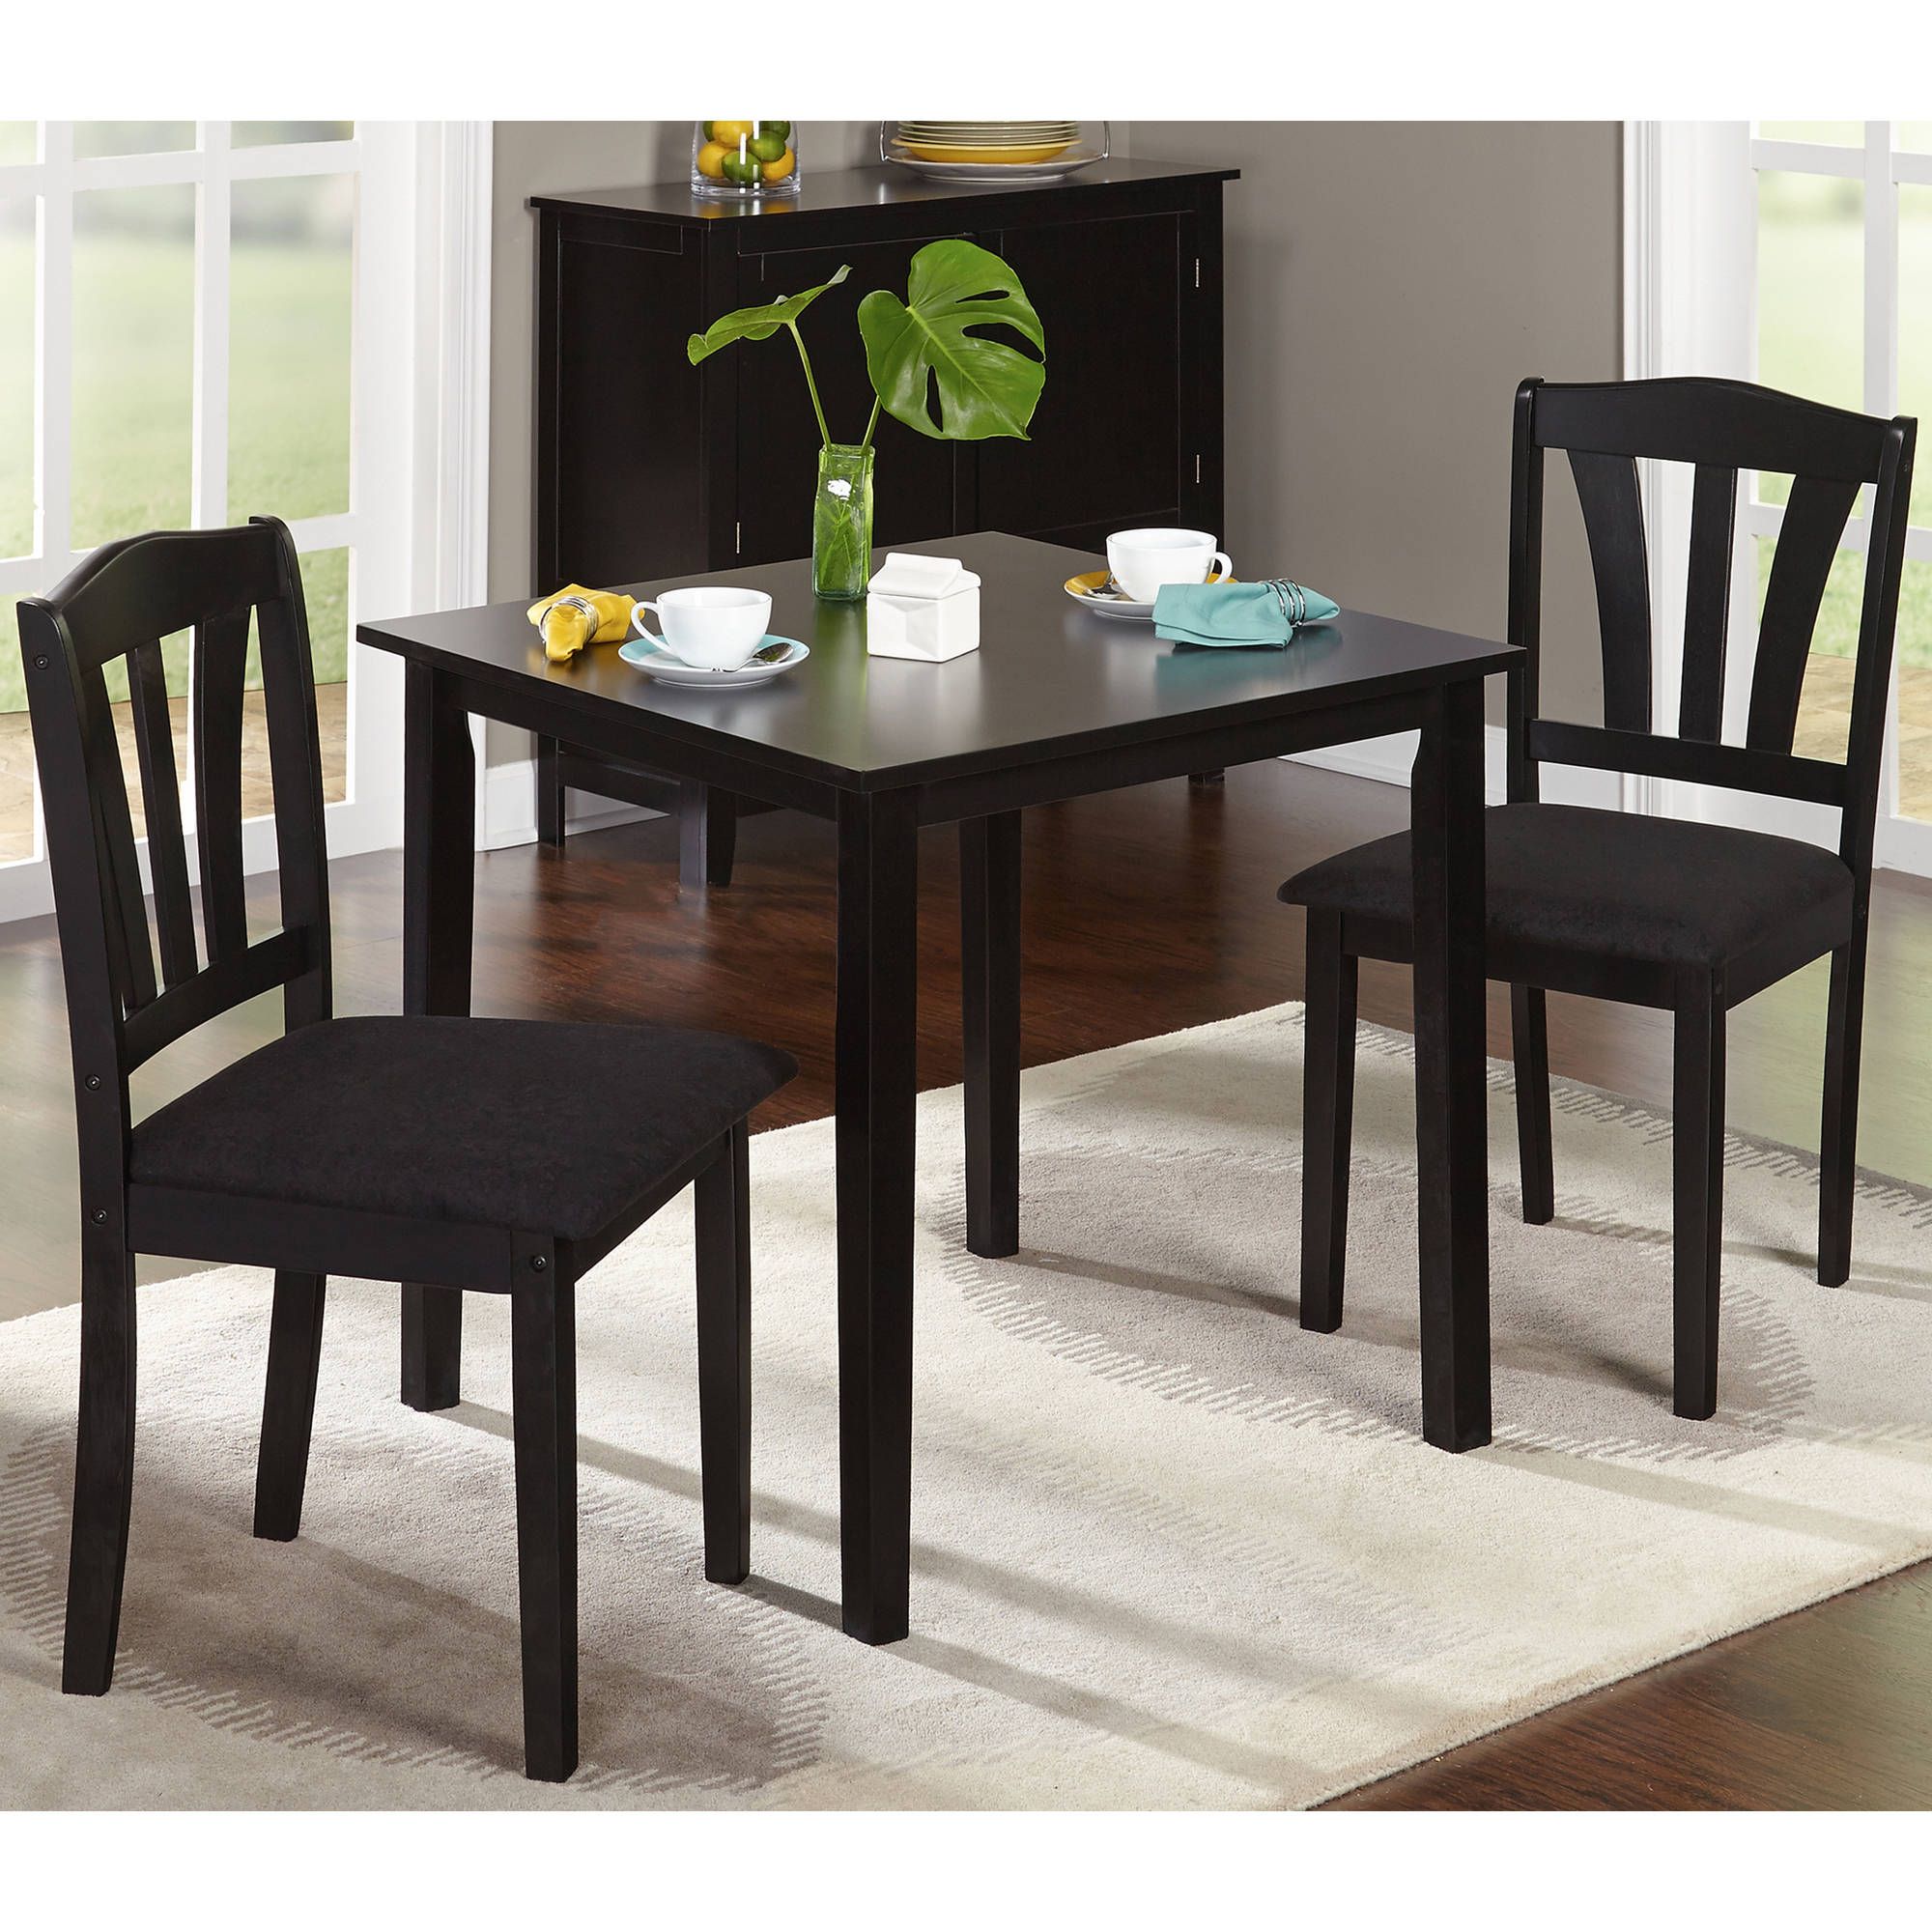 The Best 3 Piece Dining Sets